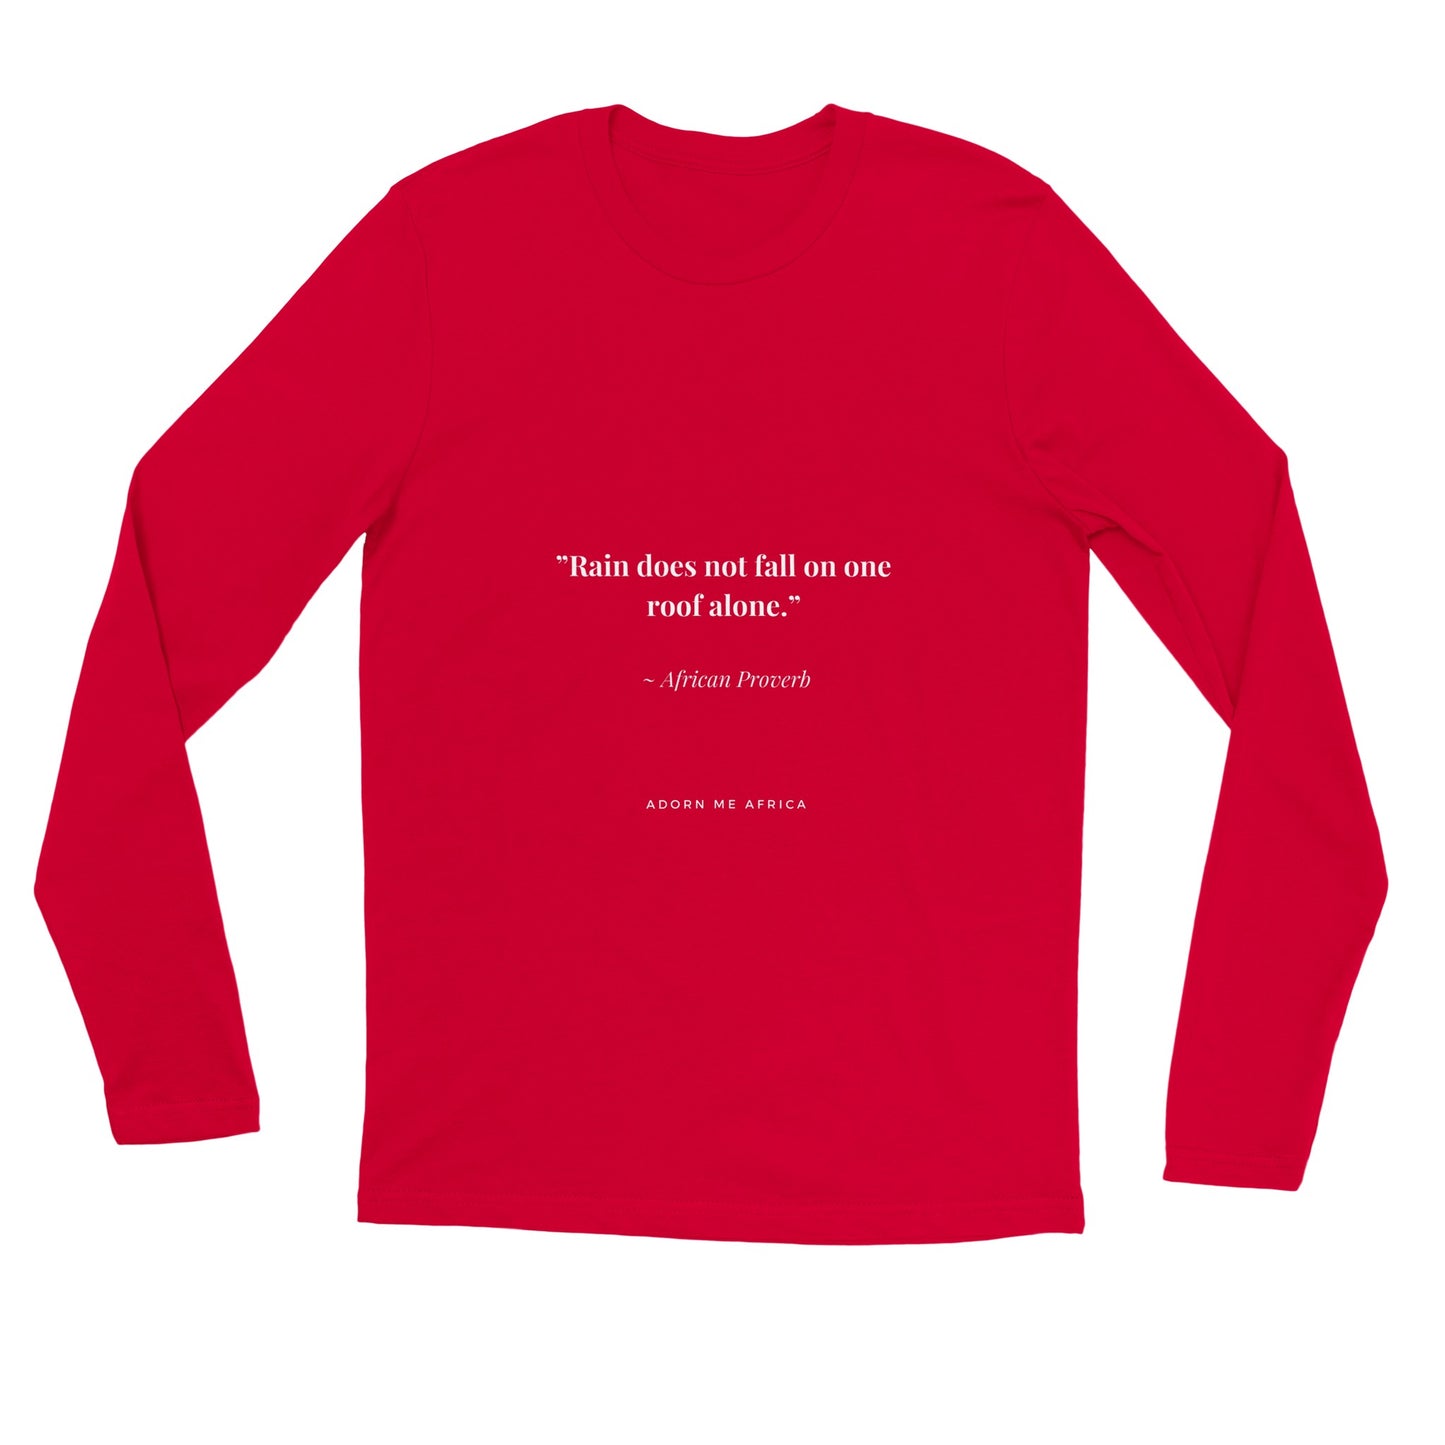 African Proverb Premium Unisex Longsleeve T-shirt - "Rain doesn't just fall on one roof alone""